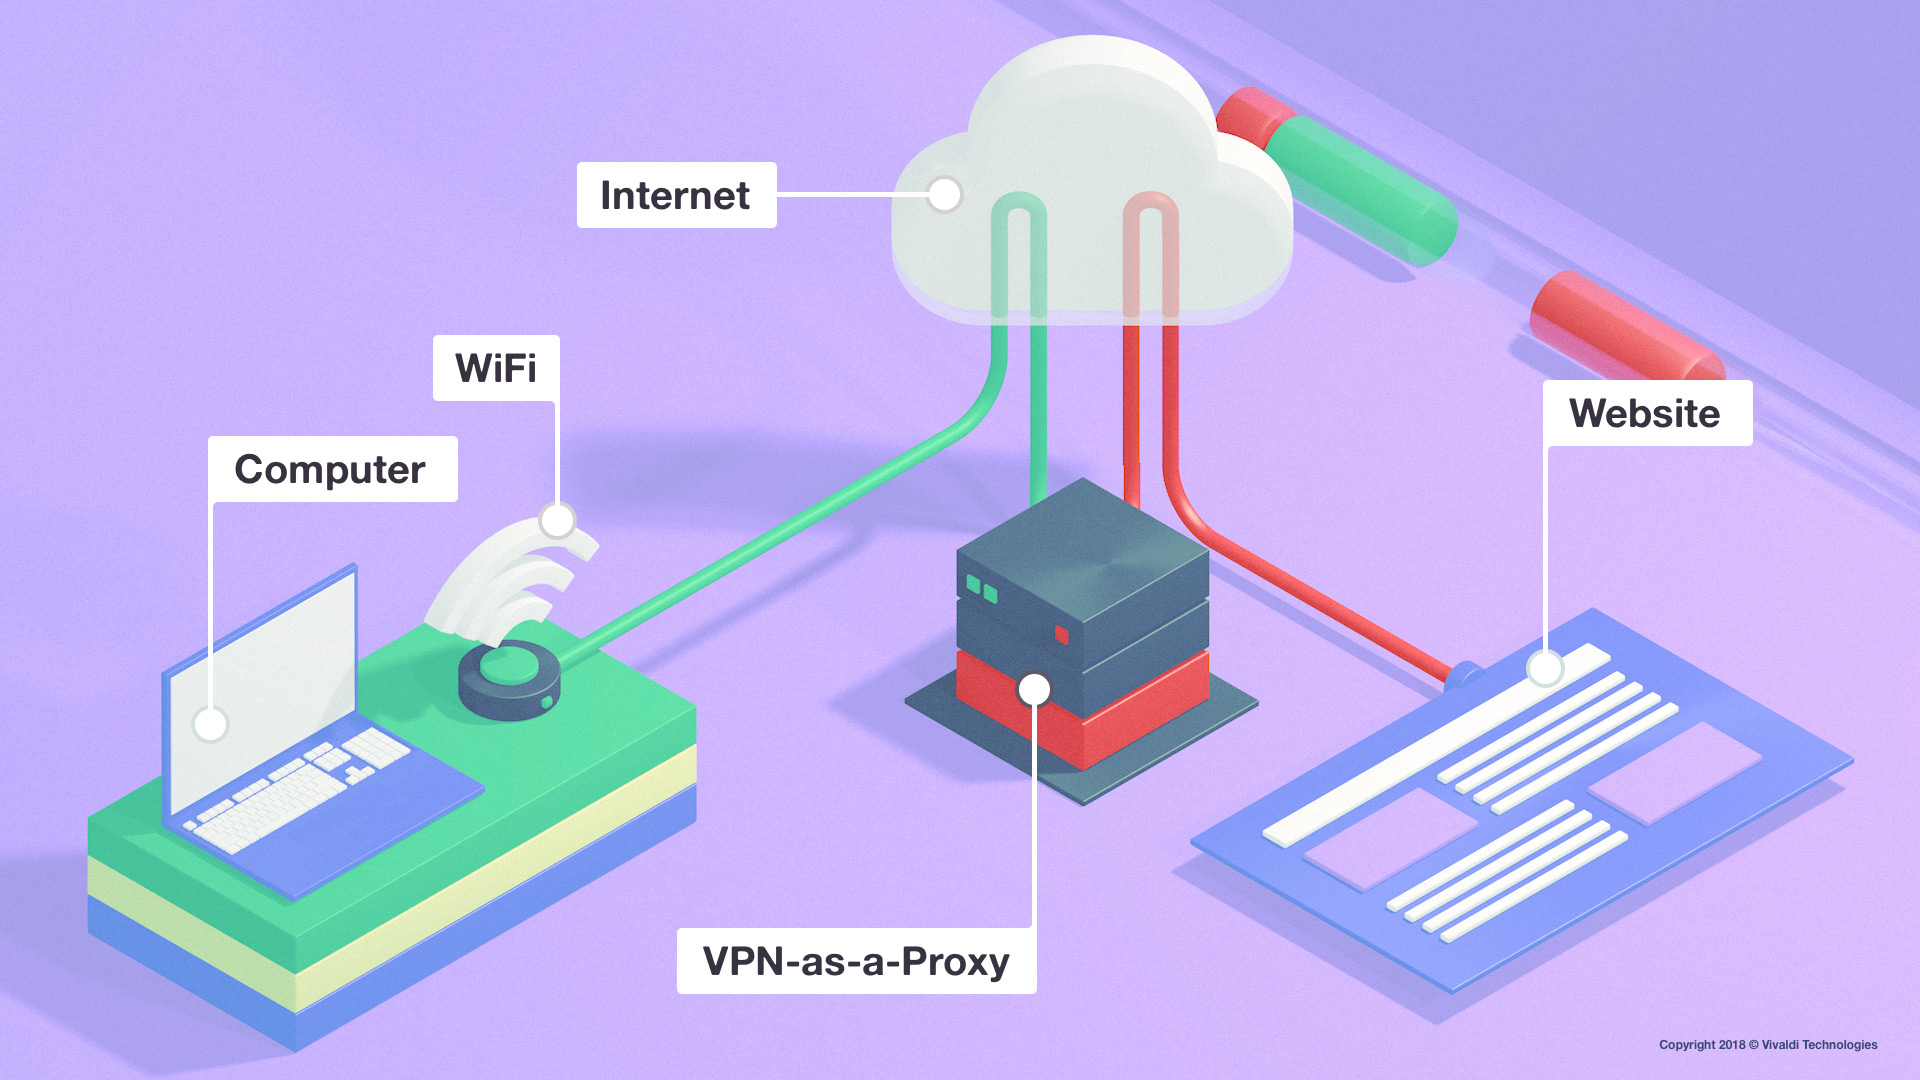 What is a proxy and how is it different from a VPN?